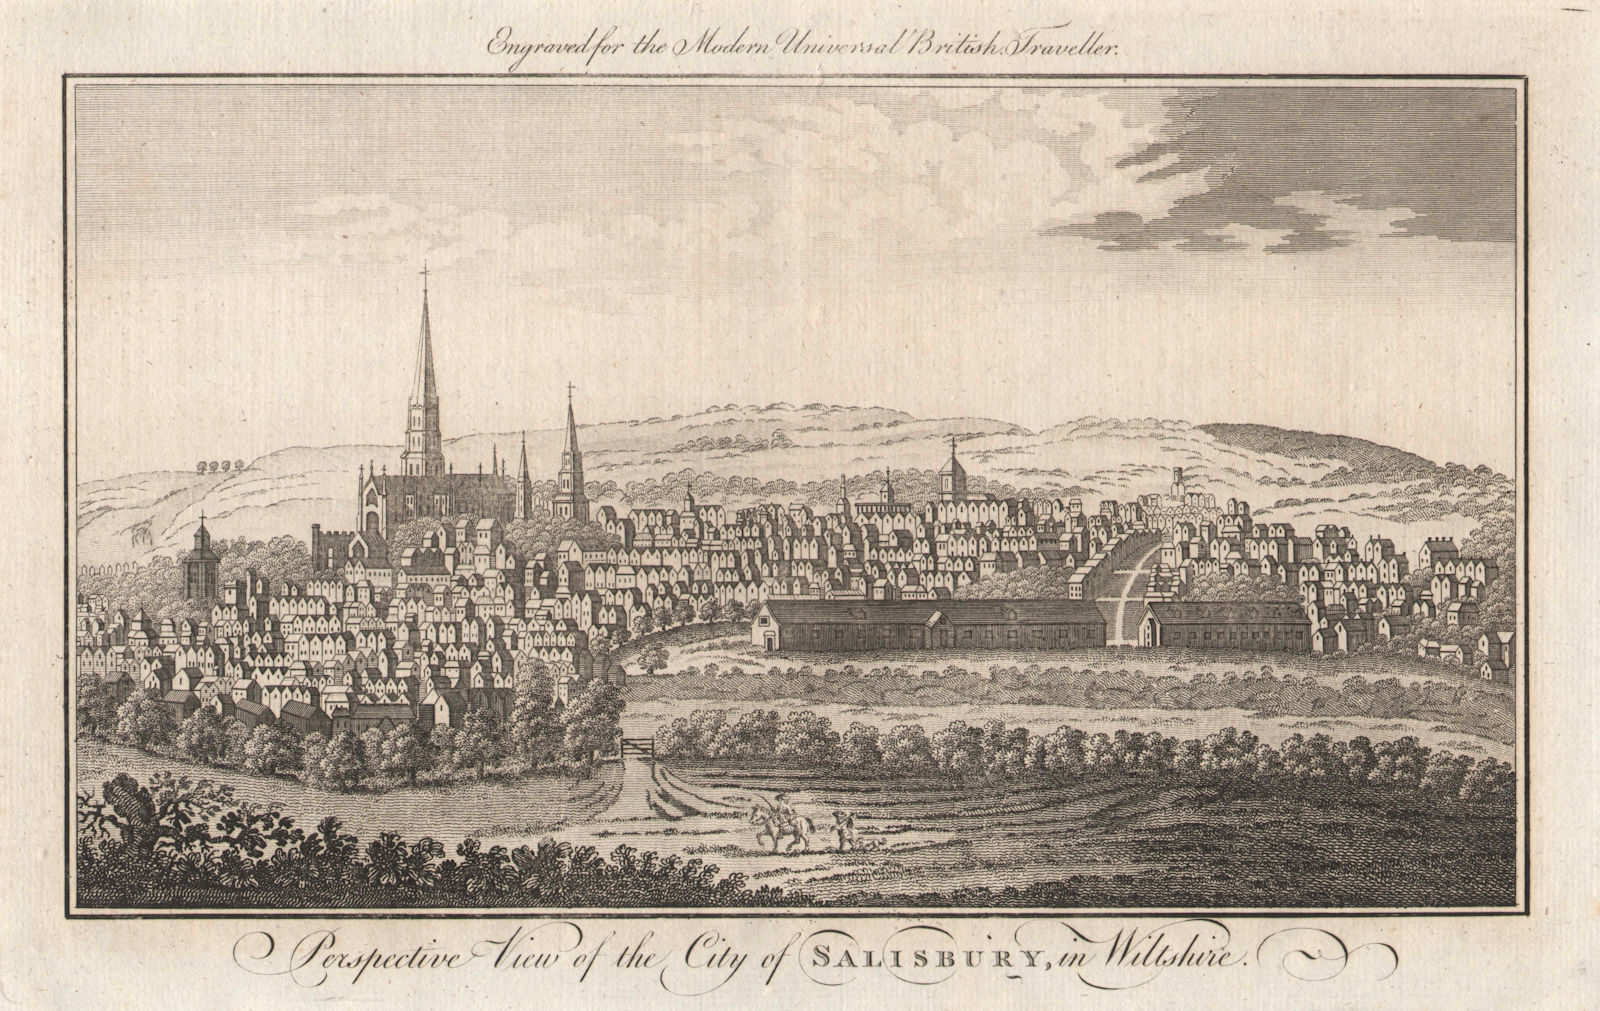 Associate Product Perspective view of the city of Salisbury in Wiltshire. BURLINGTON 1779 print